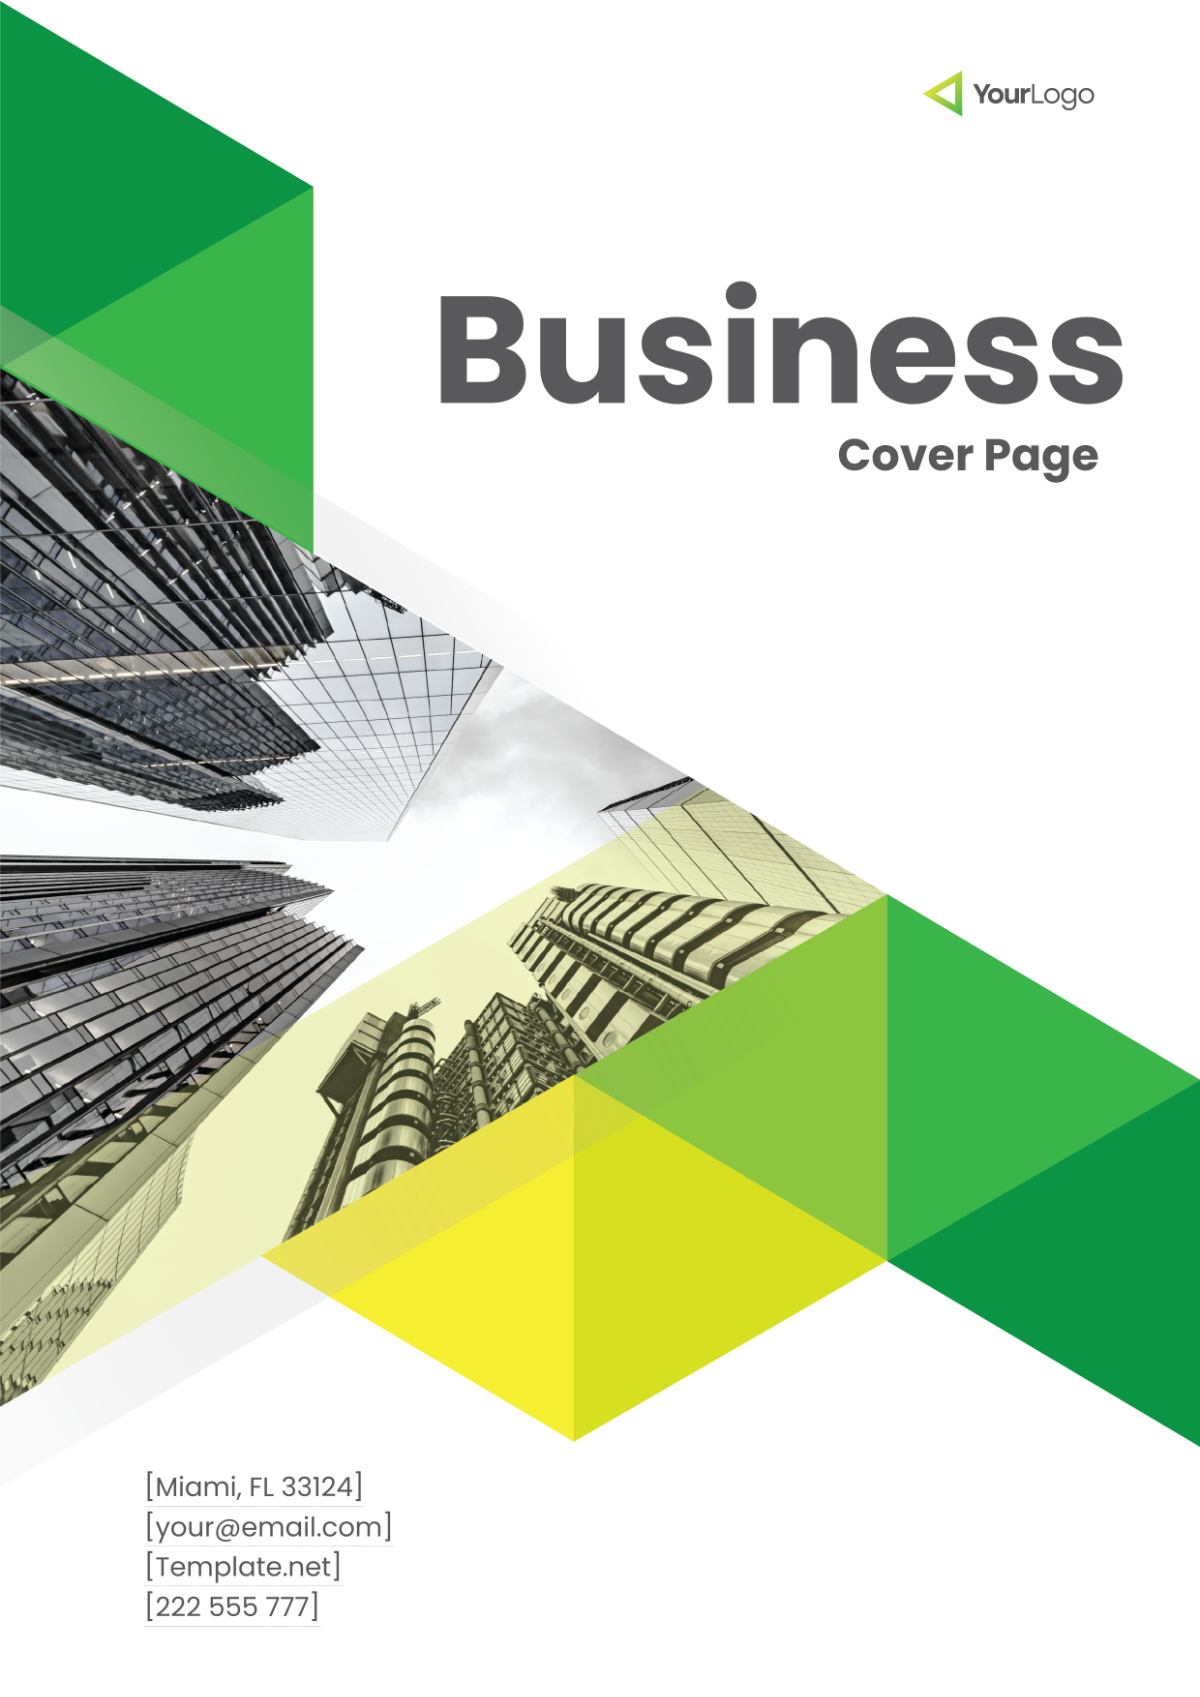 Business Cover Page Logo Template